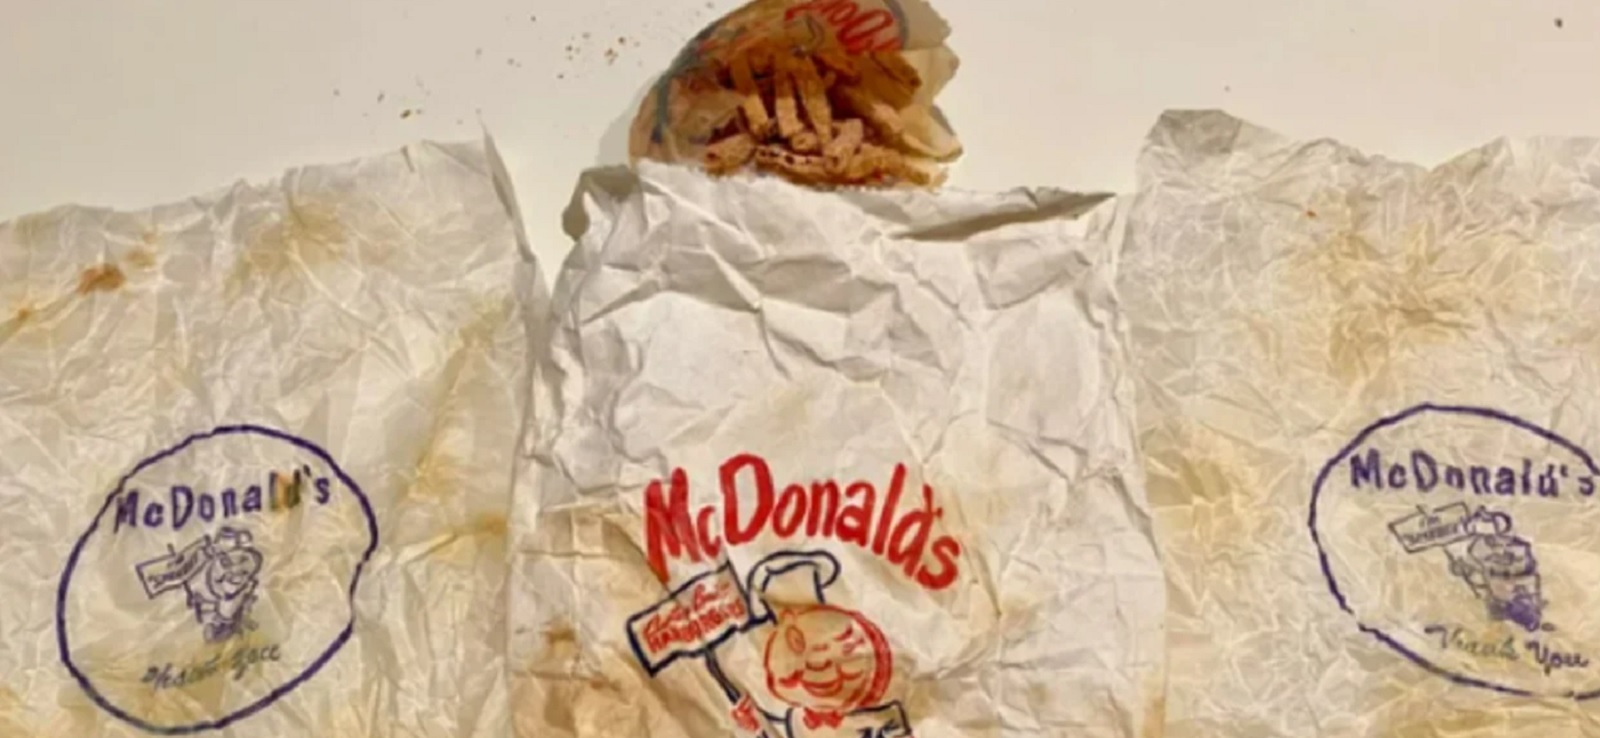 Illinois Family Finds Preserved McDonald's Food From Over Half a
Century Ago in Home's Wall